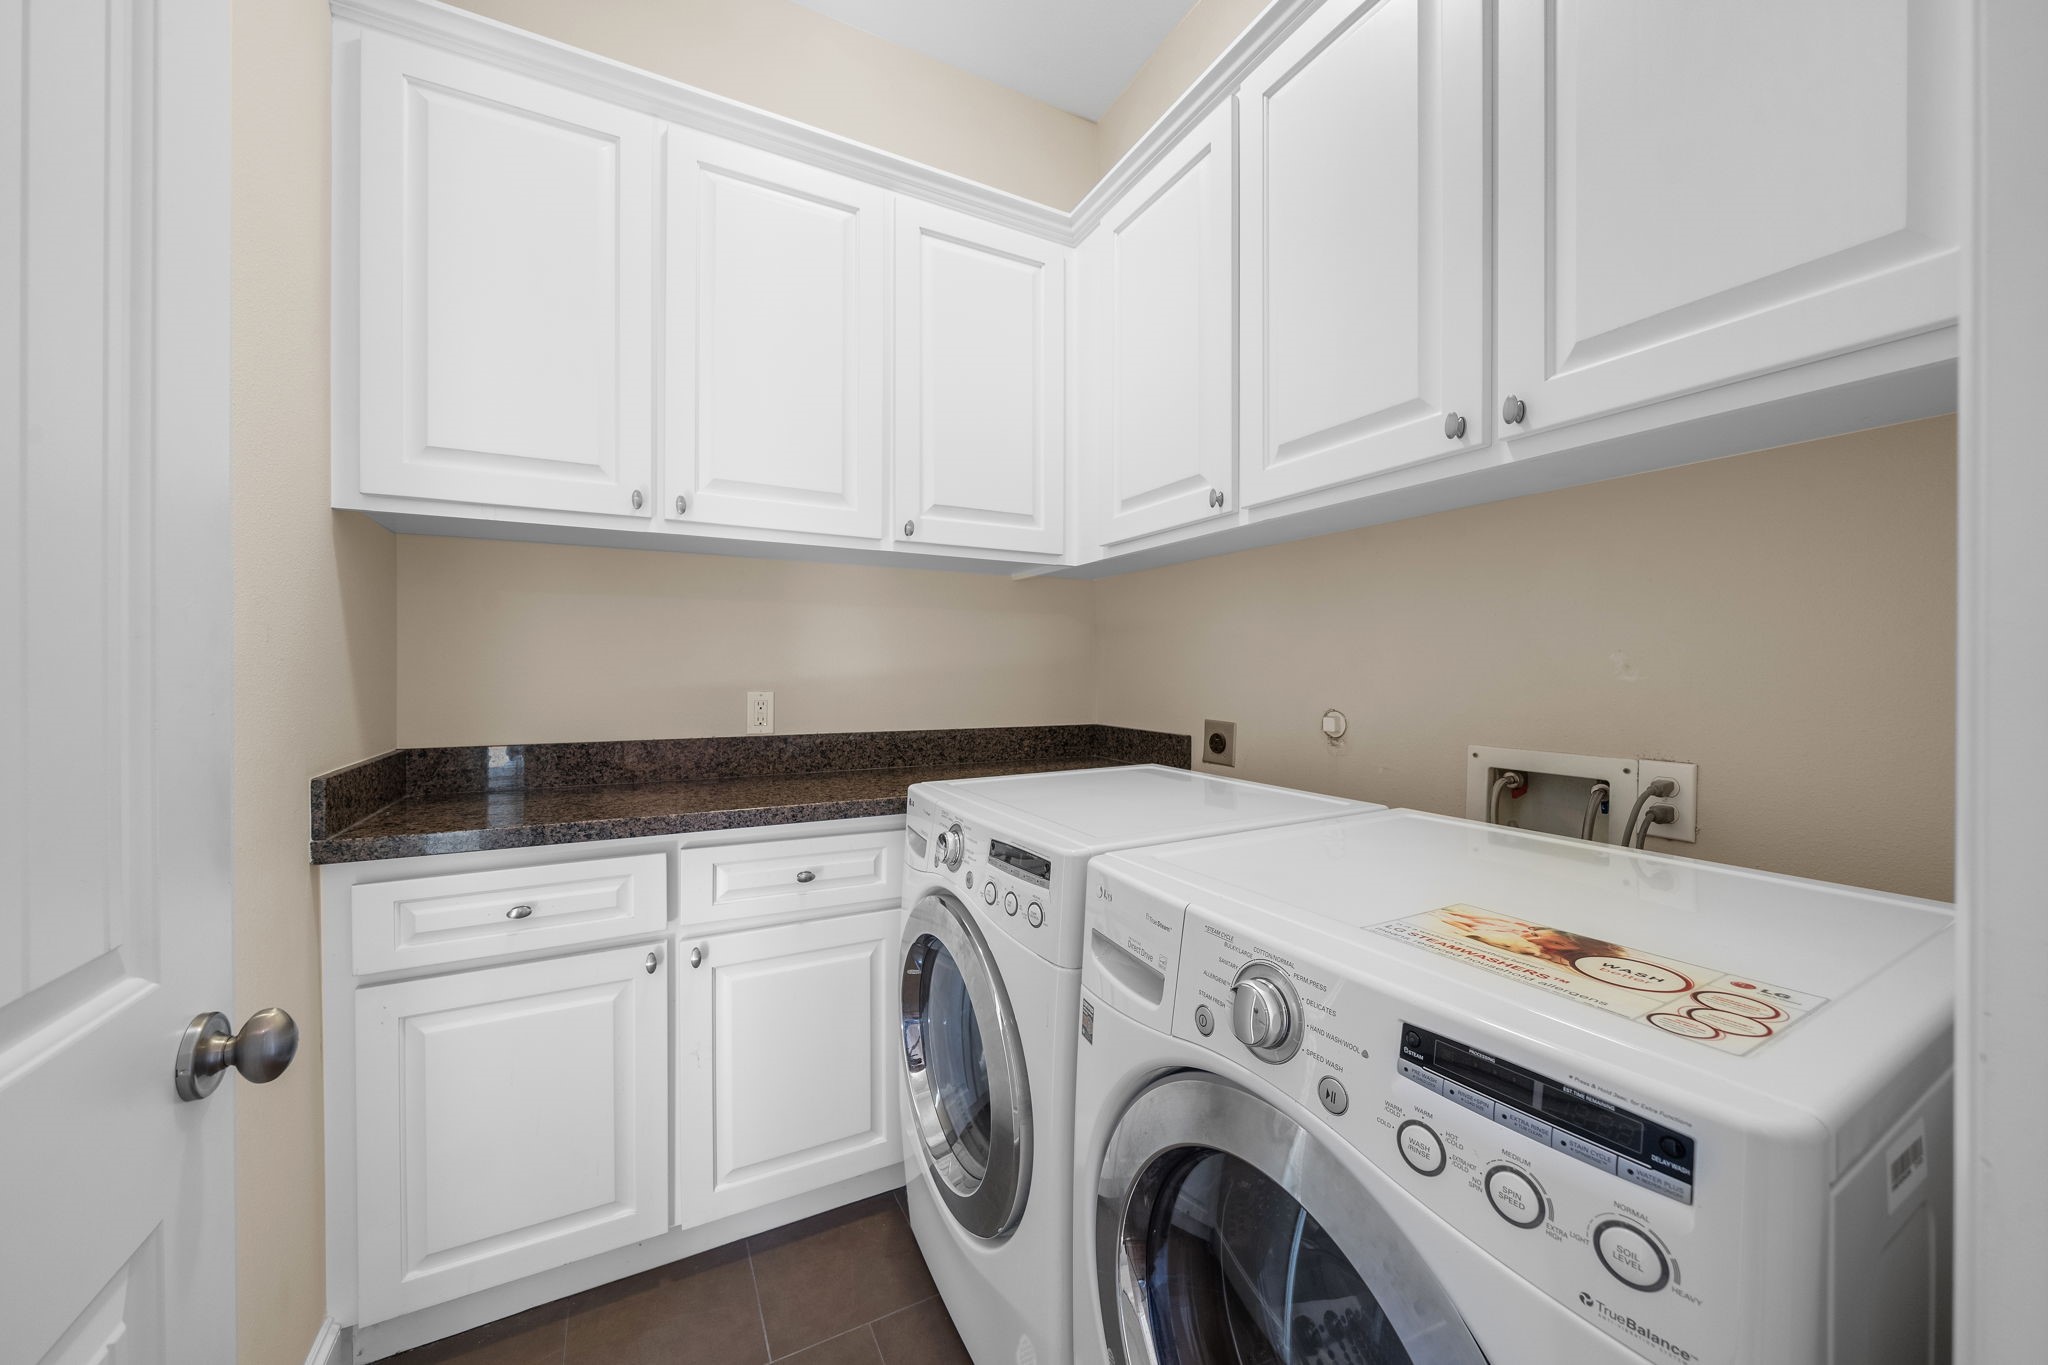 Situated on the second floor, find a laundry room complete with an abundance of built-ins, granite counters, plus an LG dryer and washer.